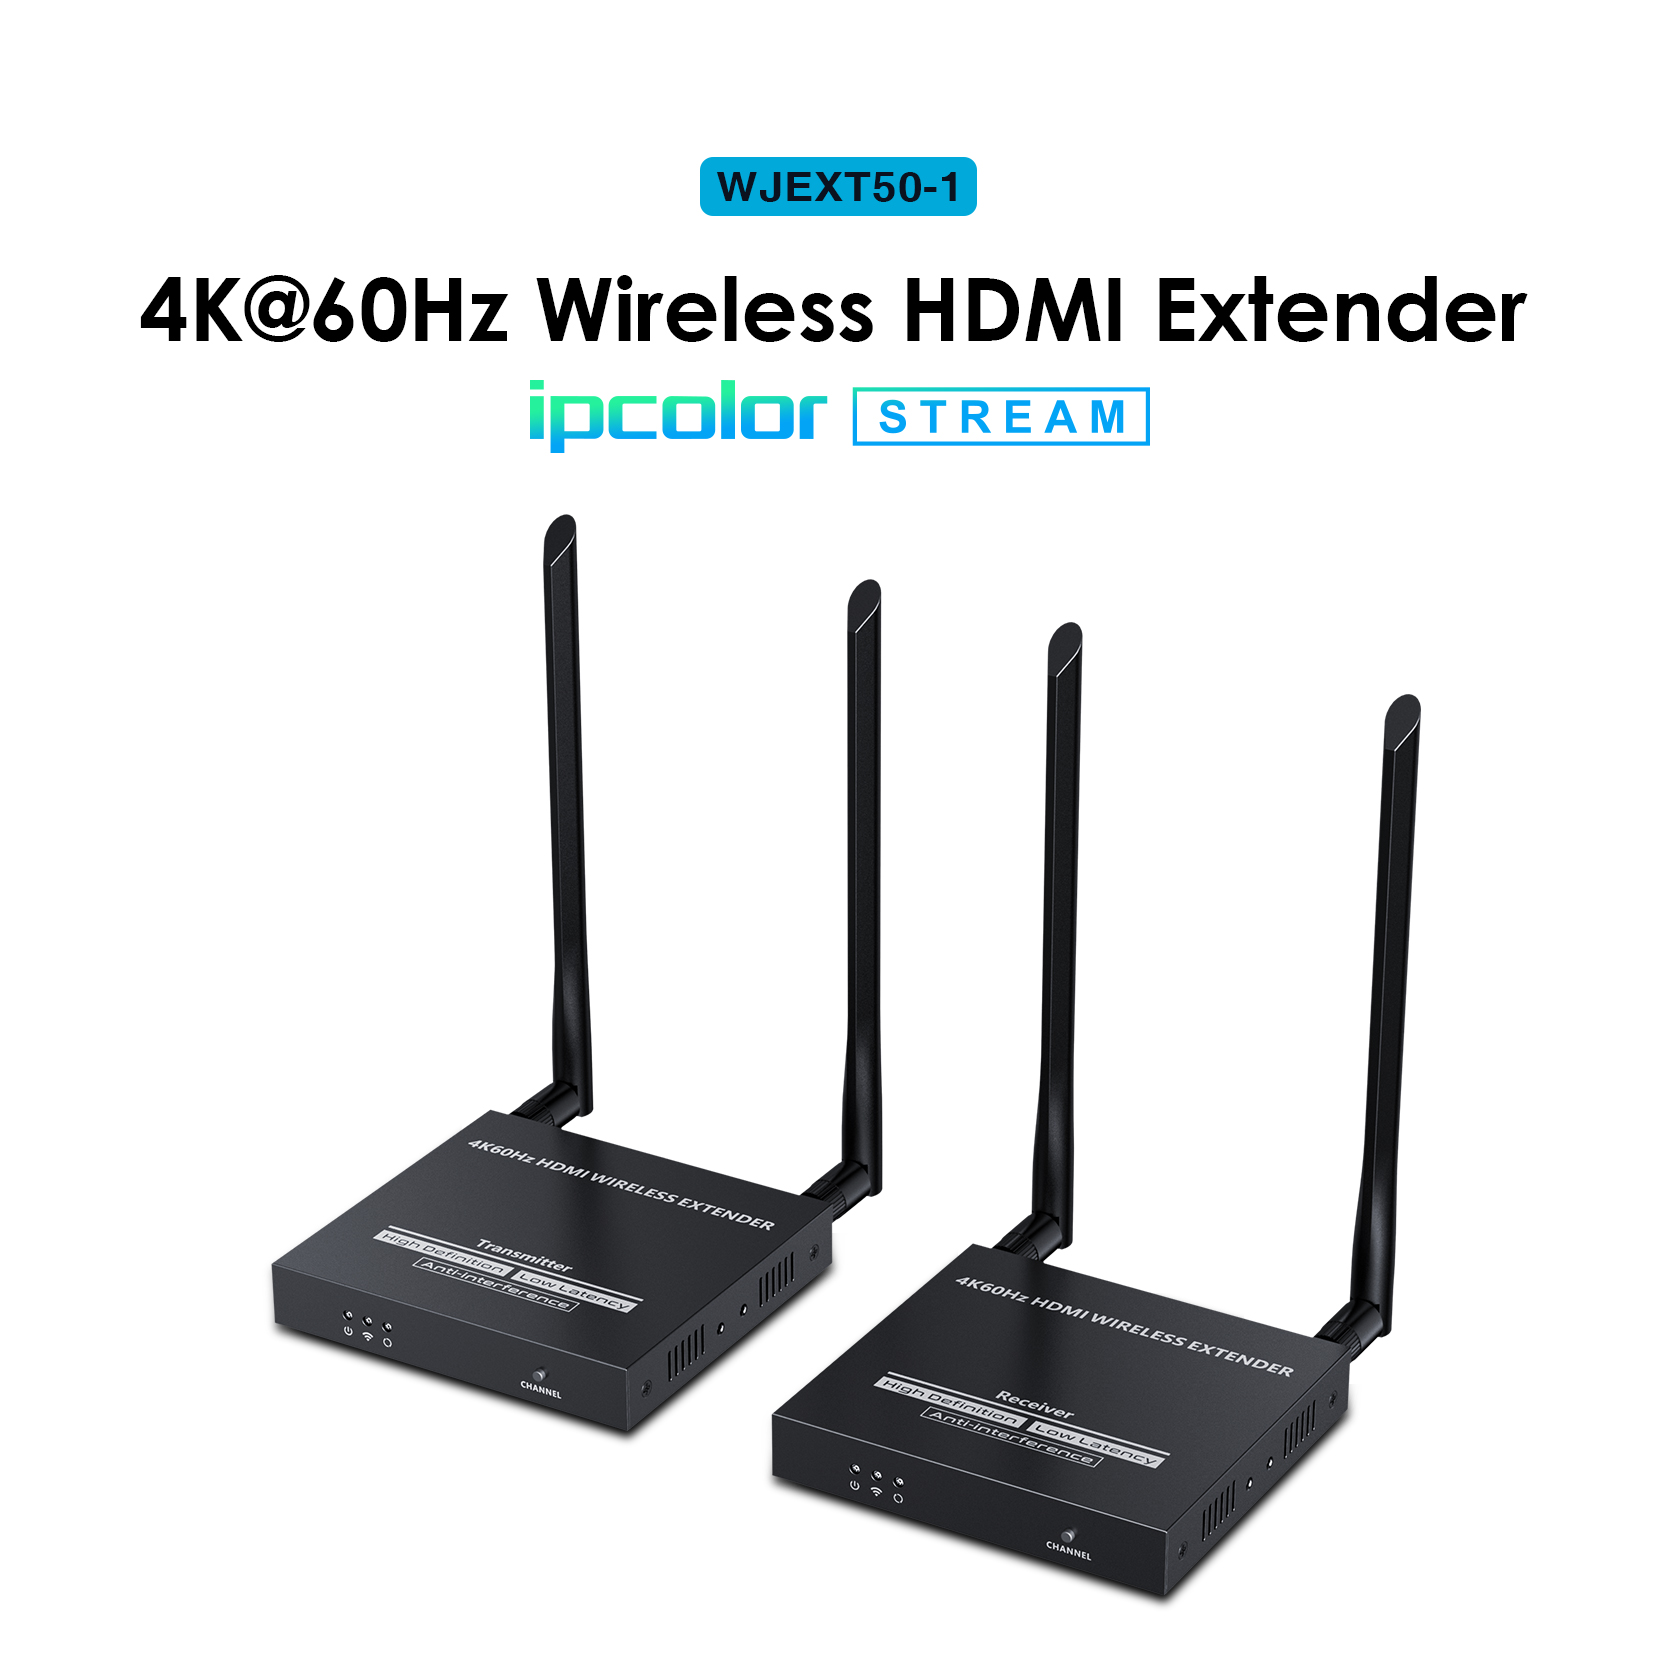 weJupit's Wireless 4kX60Hz HDMI Extender up to 50m (WJEXT50-1), 5G Wireless Frequency Bands, HDMI Loop Out, IR passback, SSID Pairing and Channel Switching